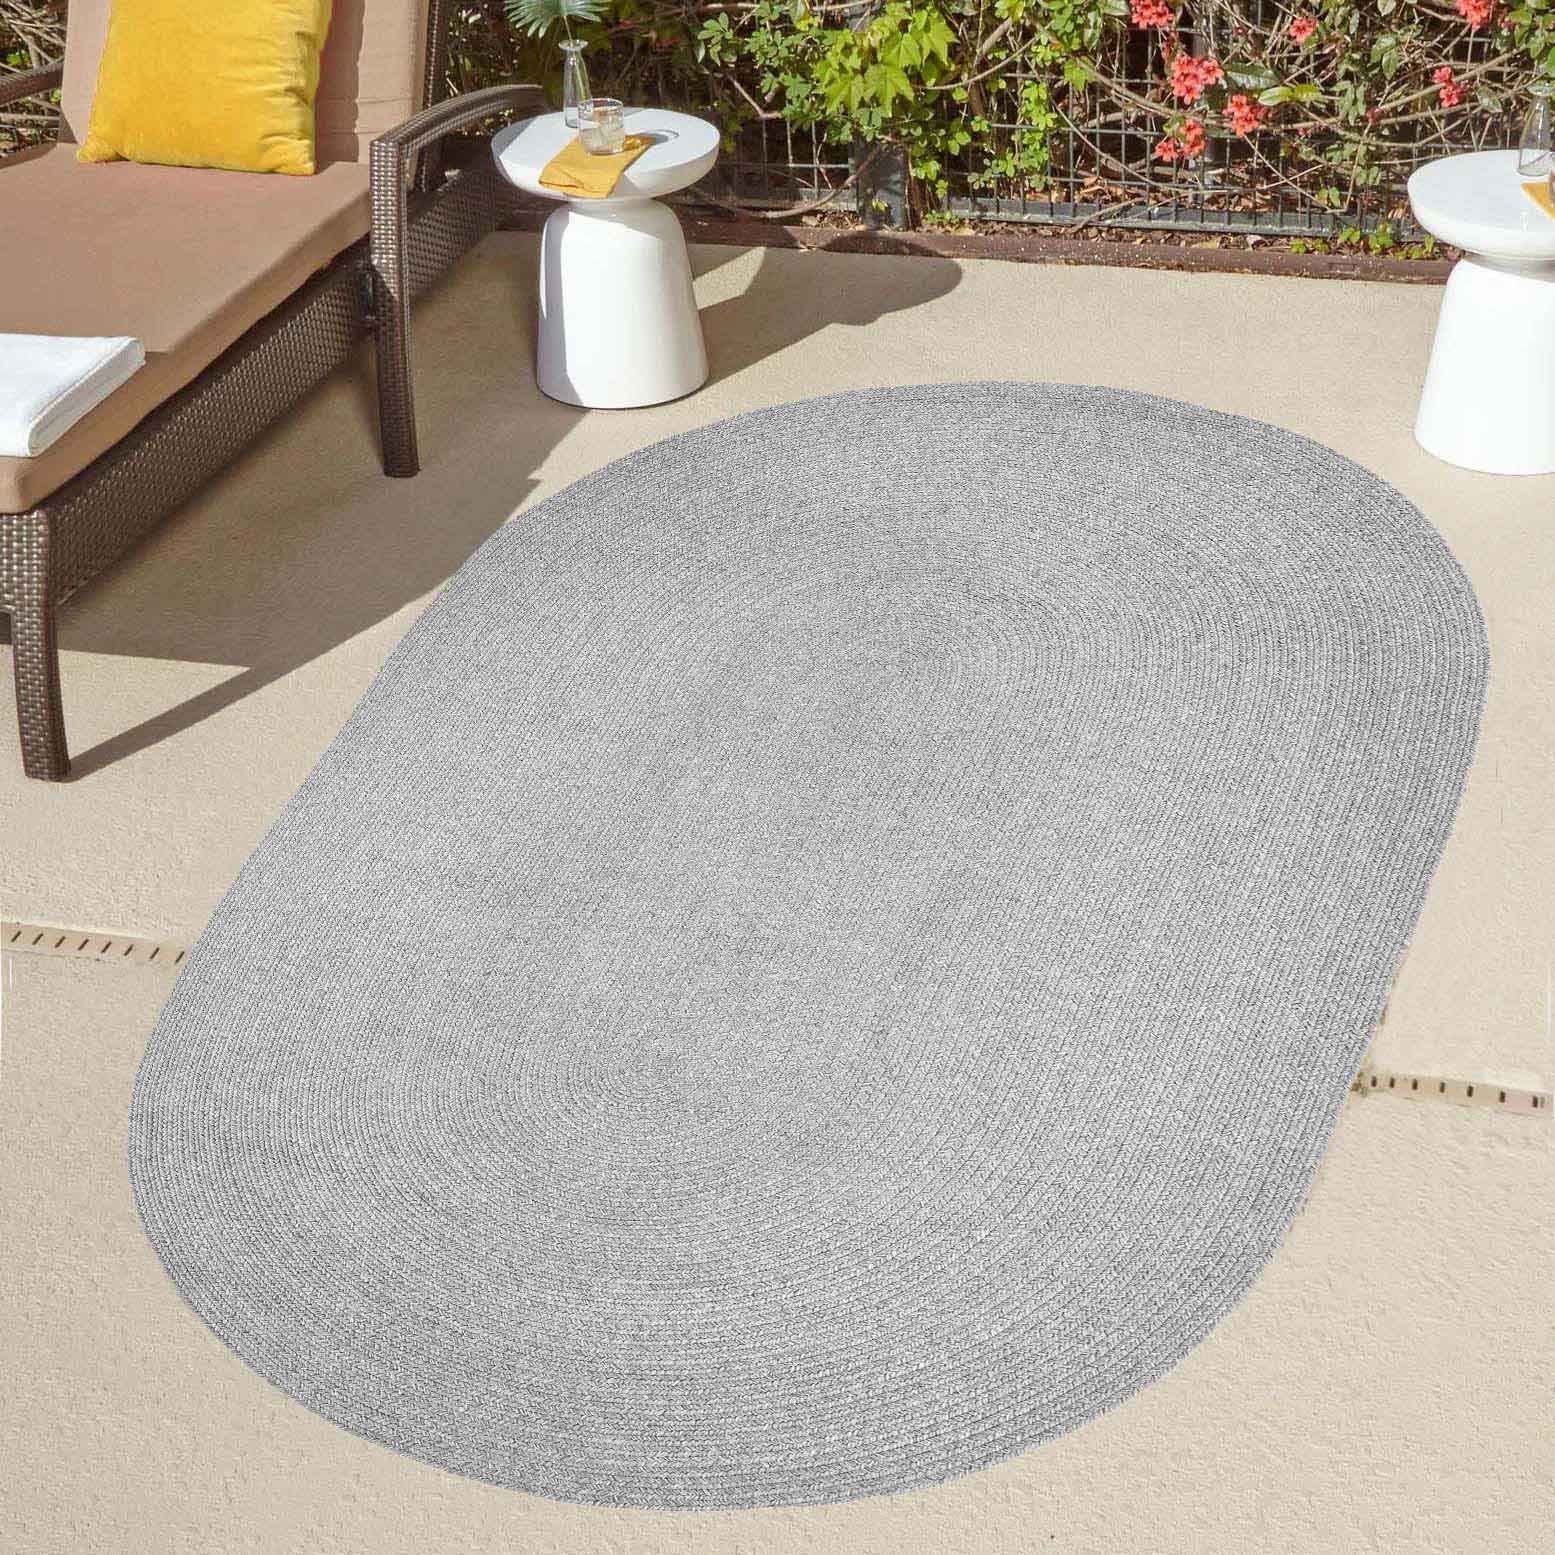 Classic Braided Weave Oval Area Rug Indoor Outdoor Rugs - Slate